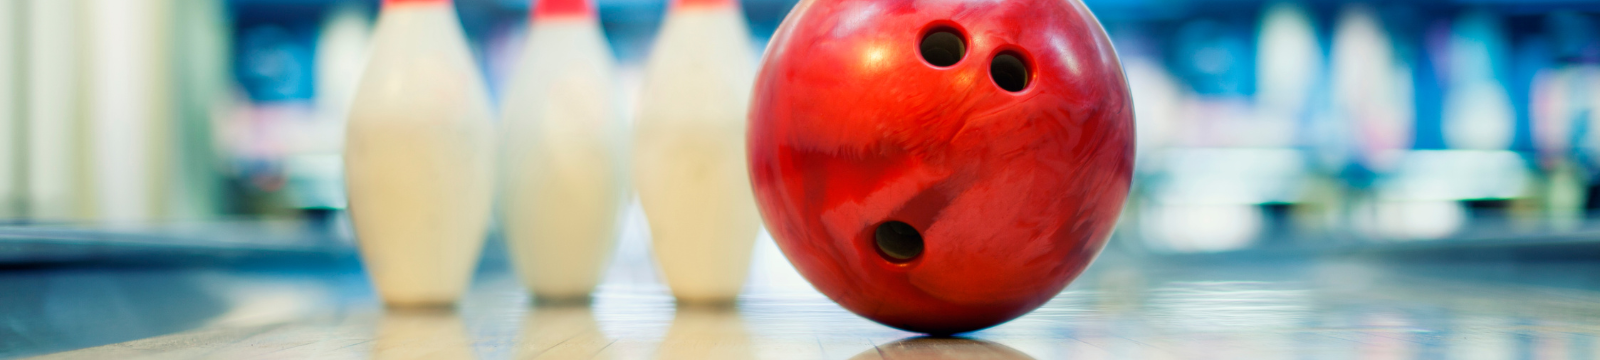 Bowling ball and pins in bowling alley